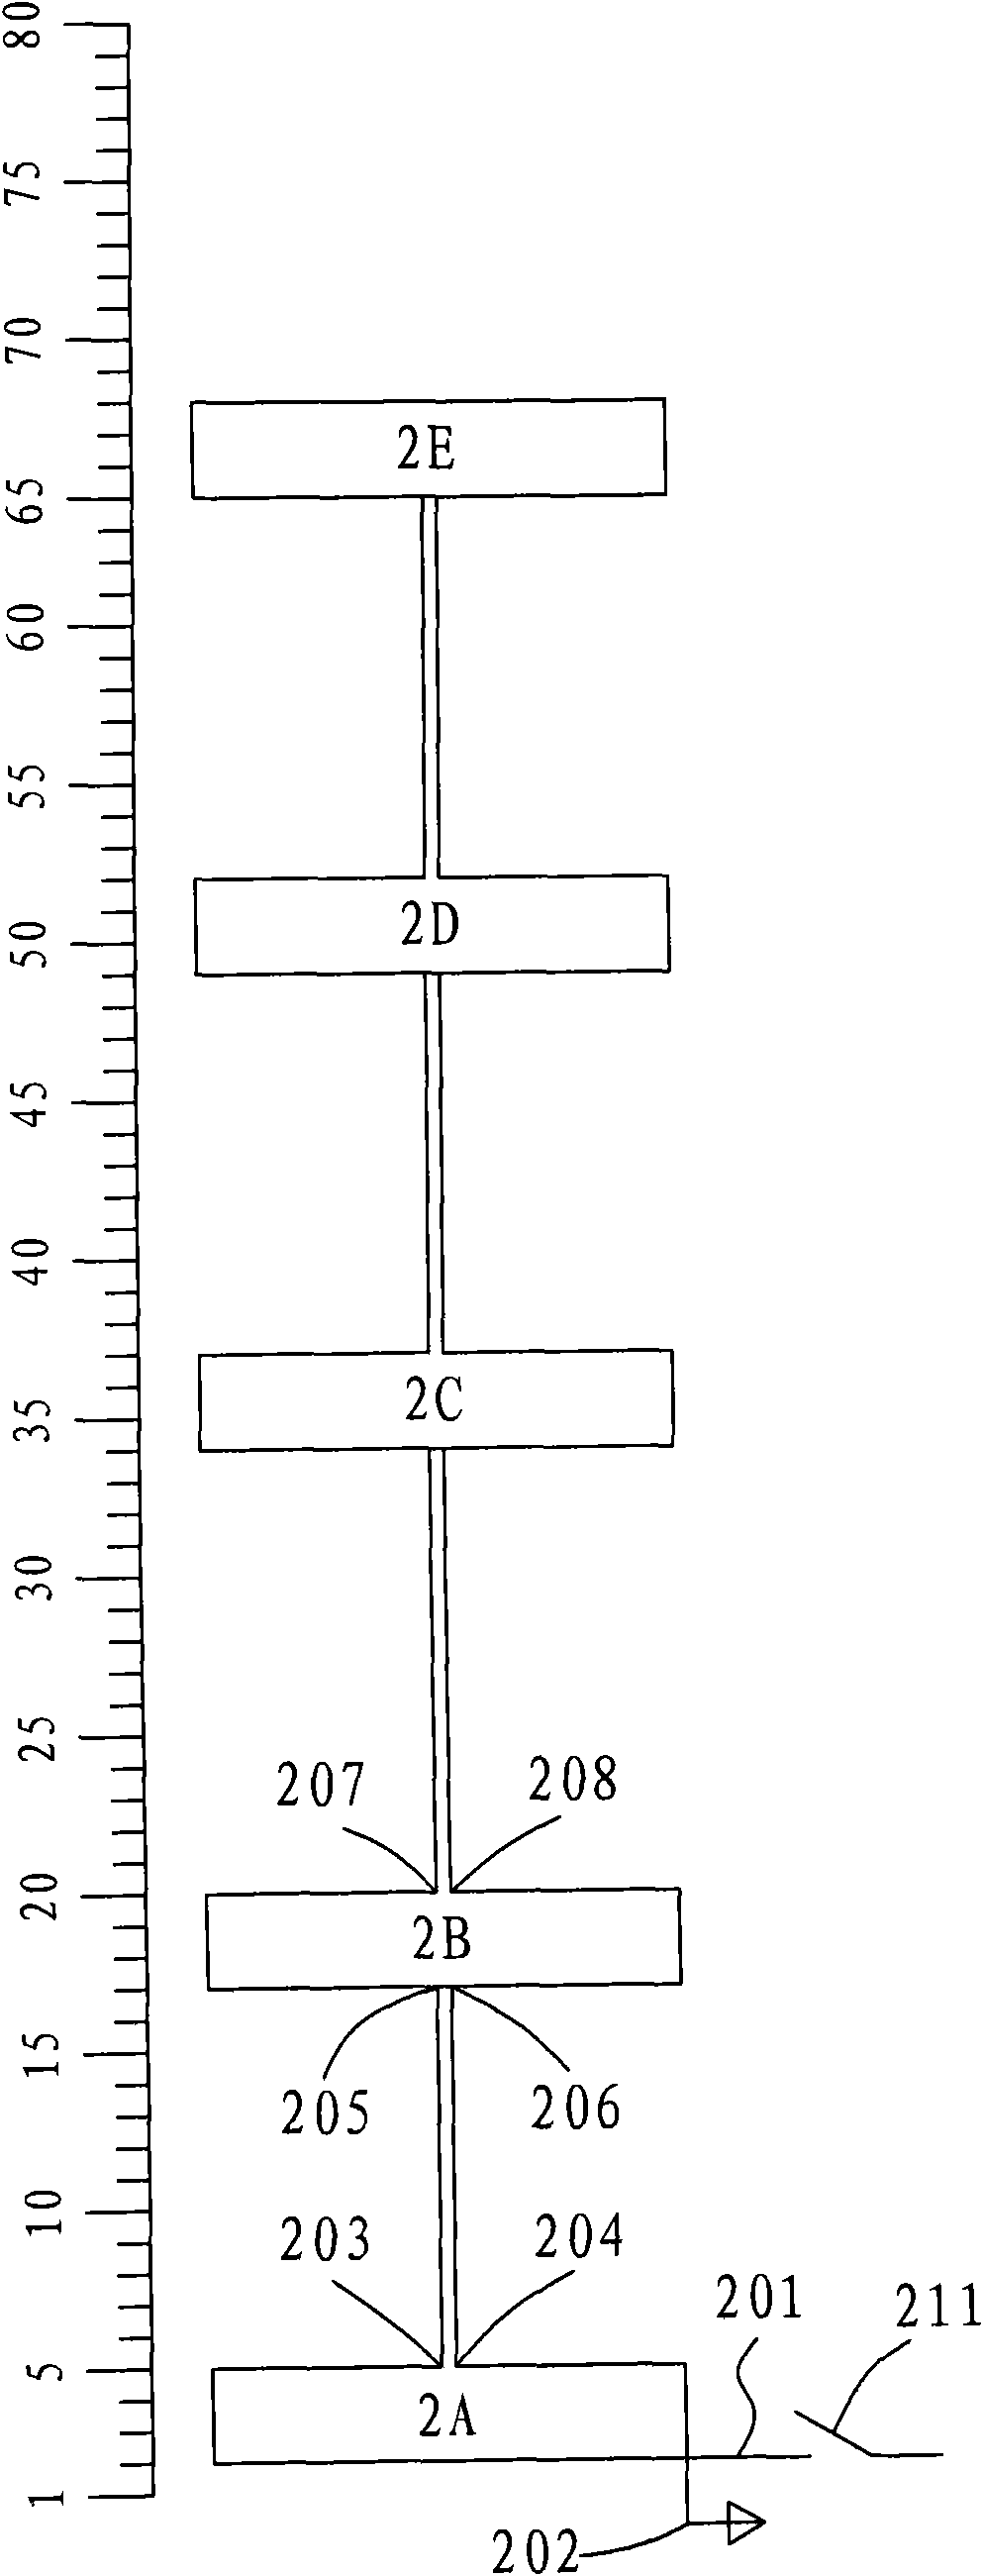 Digital plate and method for obtaining position of digital plate